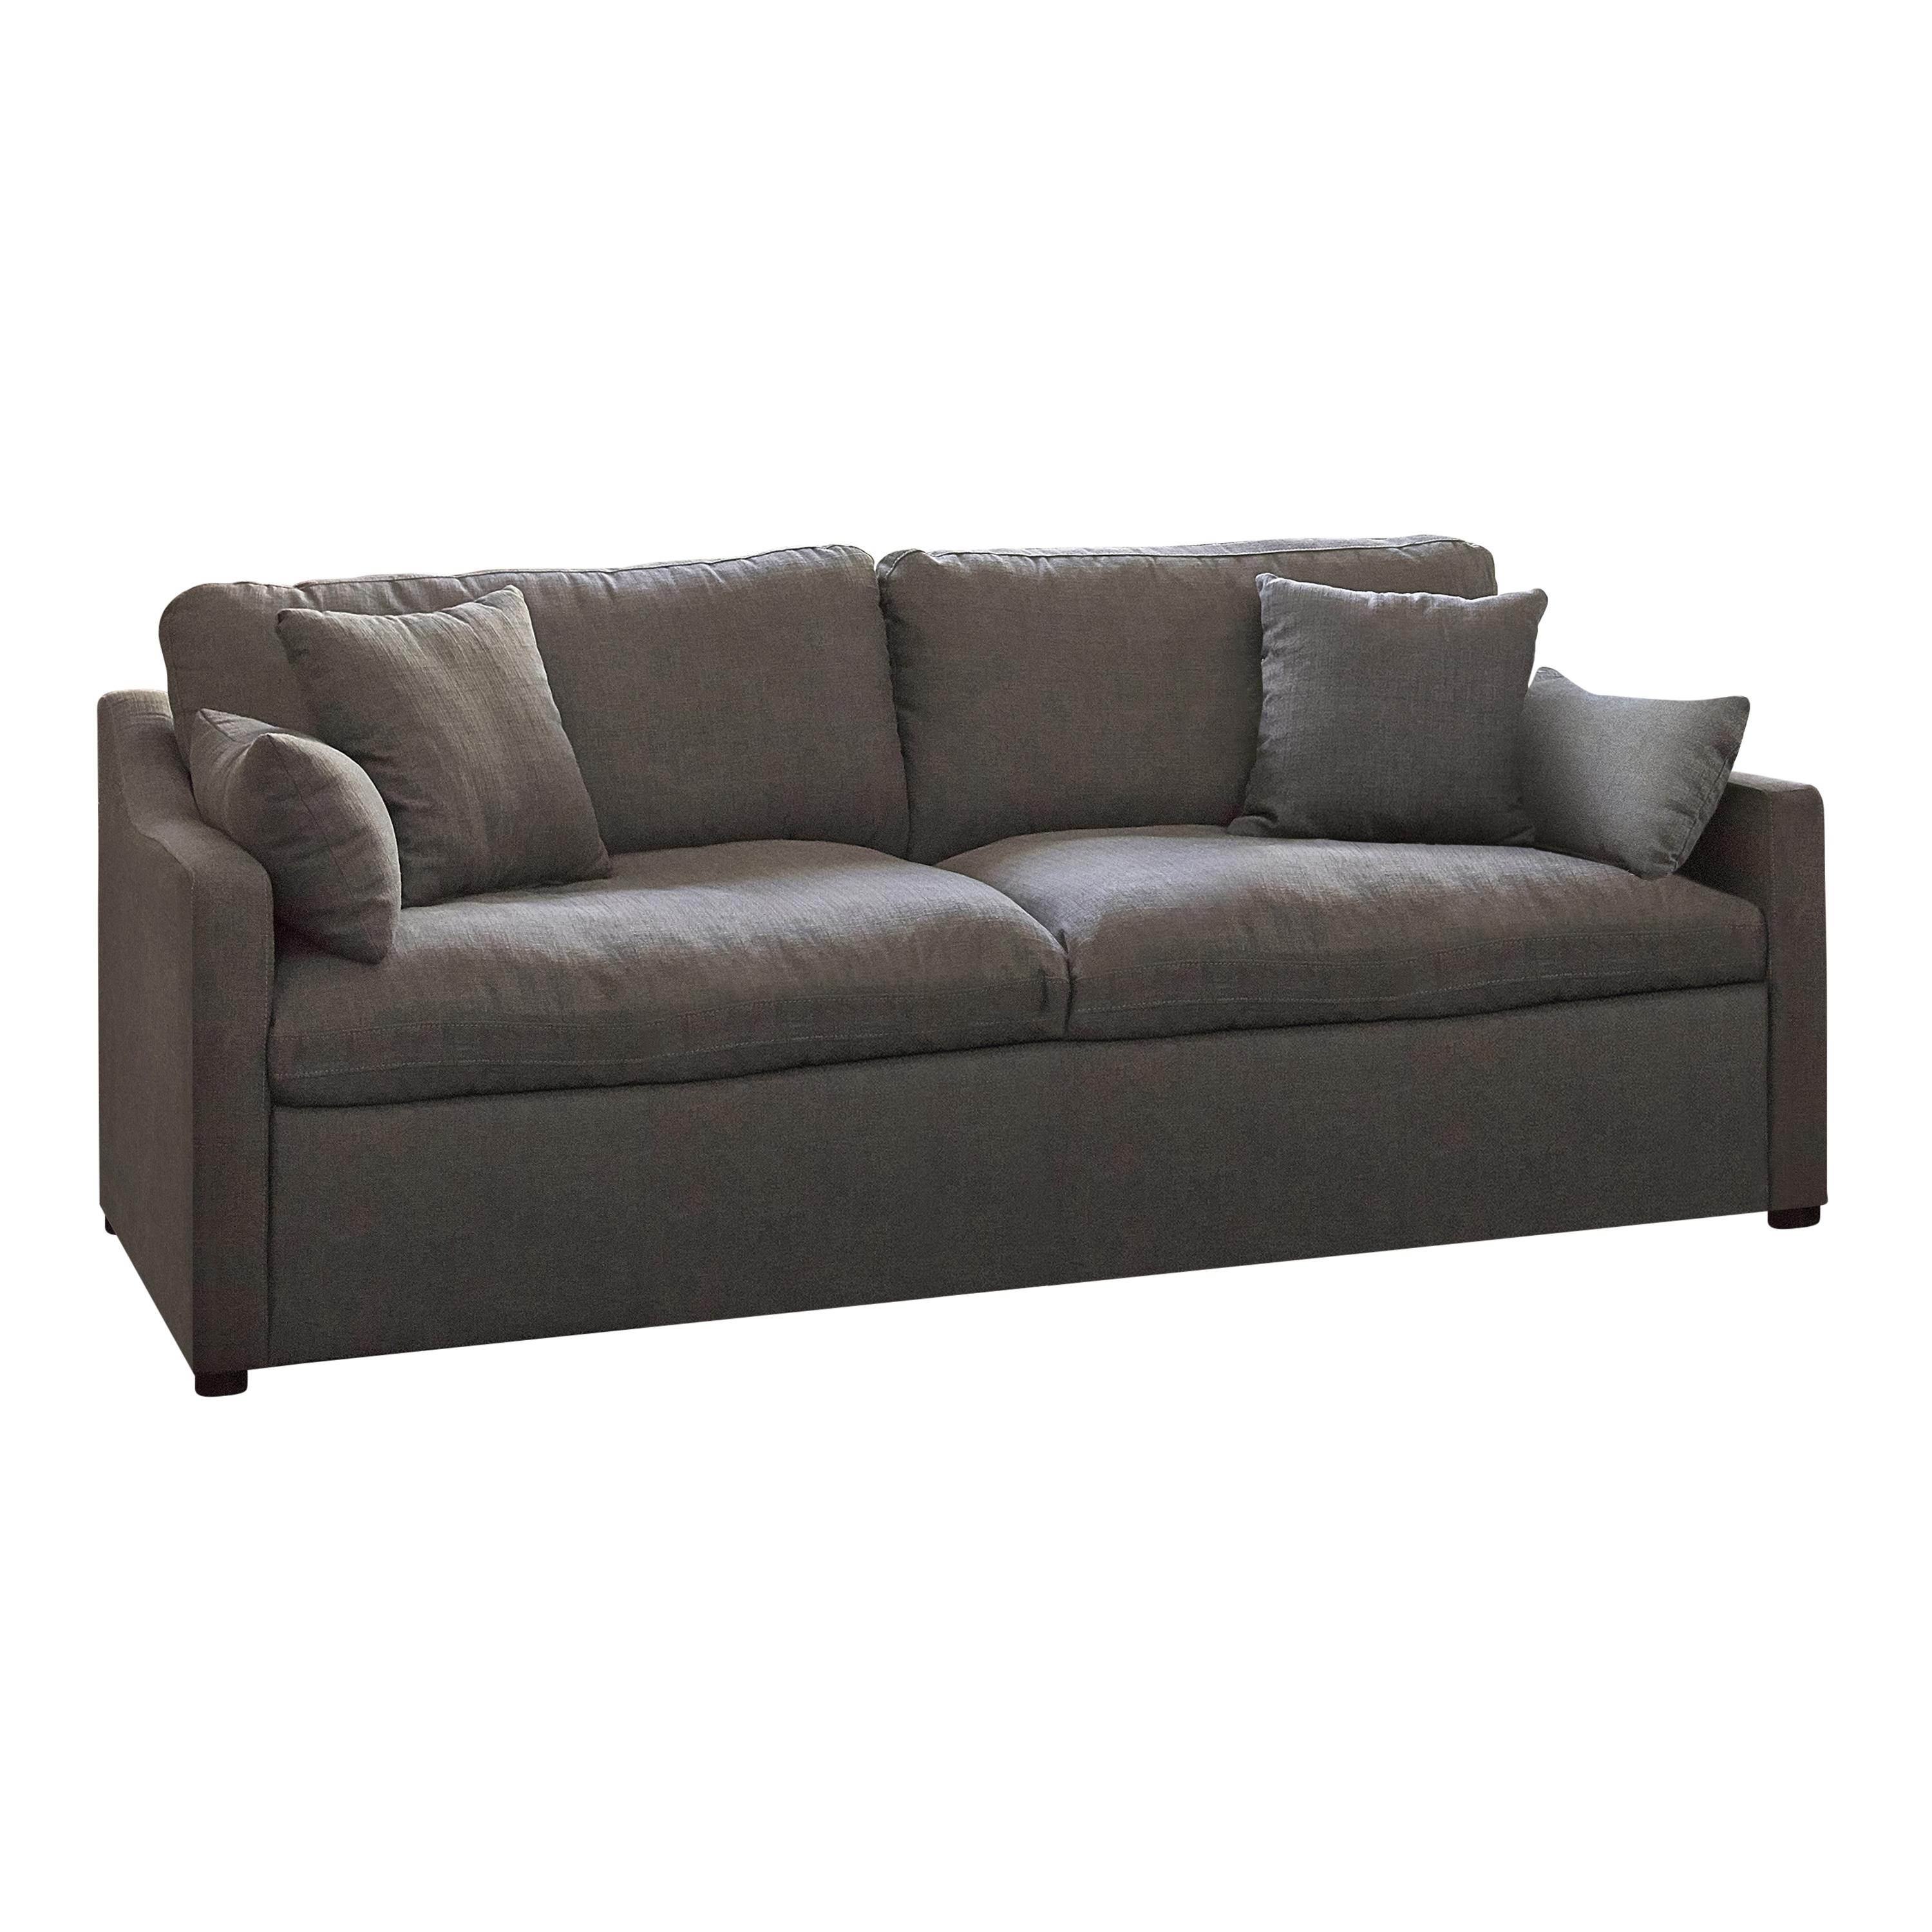 Transitional Sofa 509381 Contrary 509381 in Charcoal 